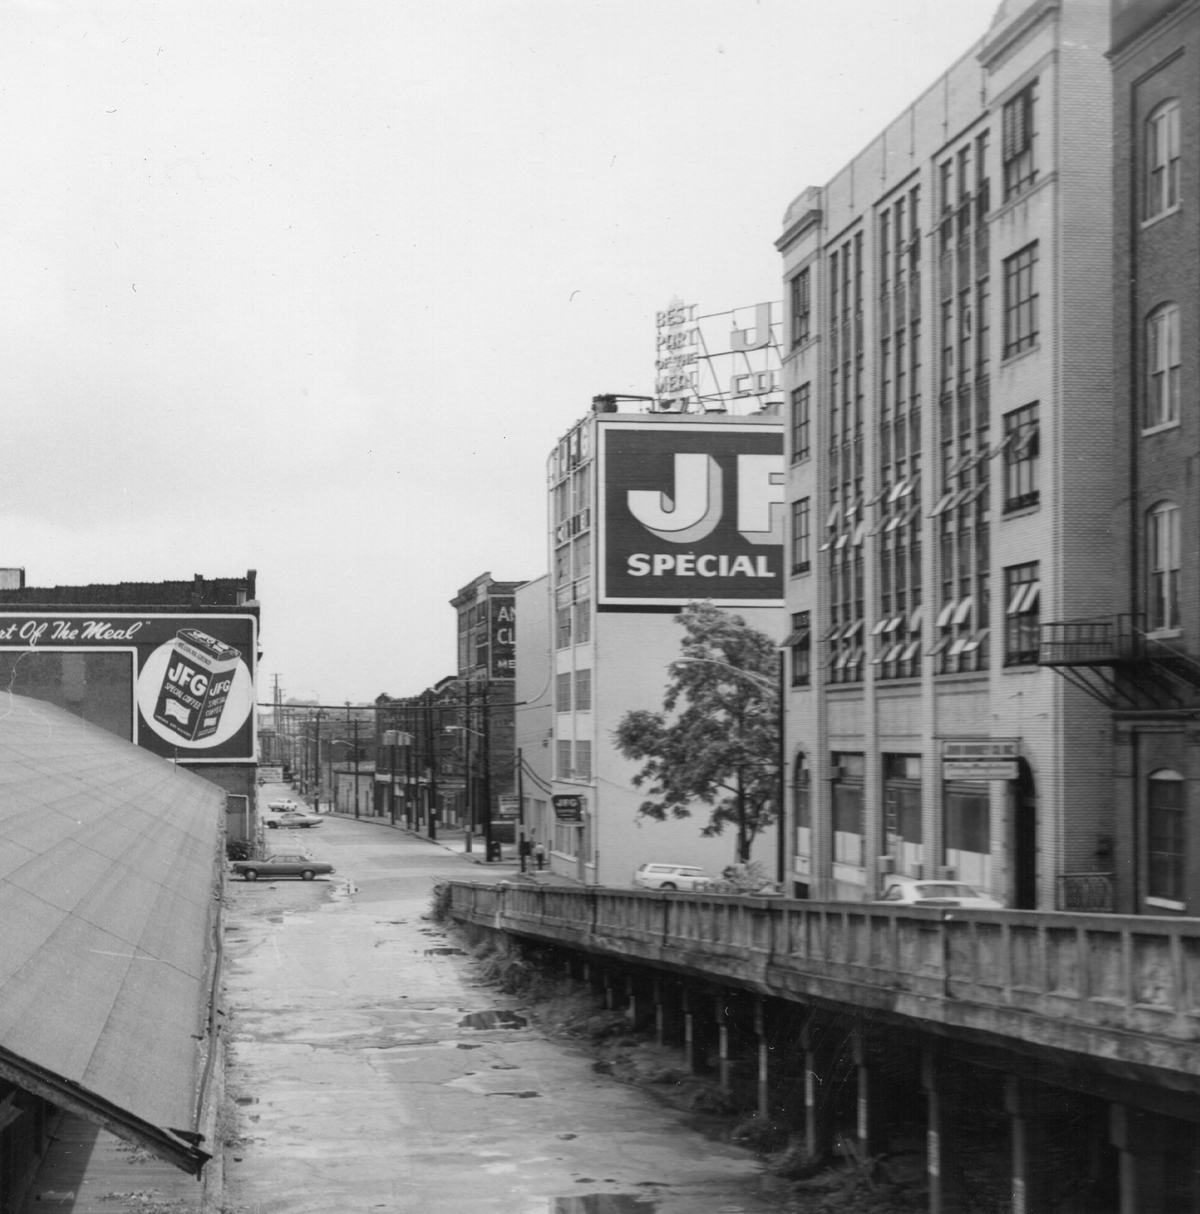 West Jackson Avenue Viaduct down from the 100 block of S. Gay Street to the Old City by Ross Mol, early 1970s.